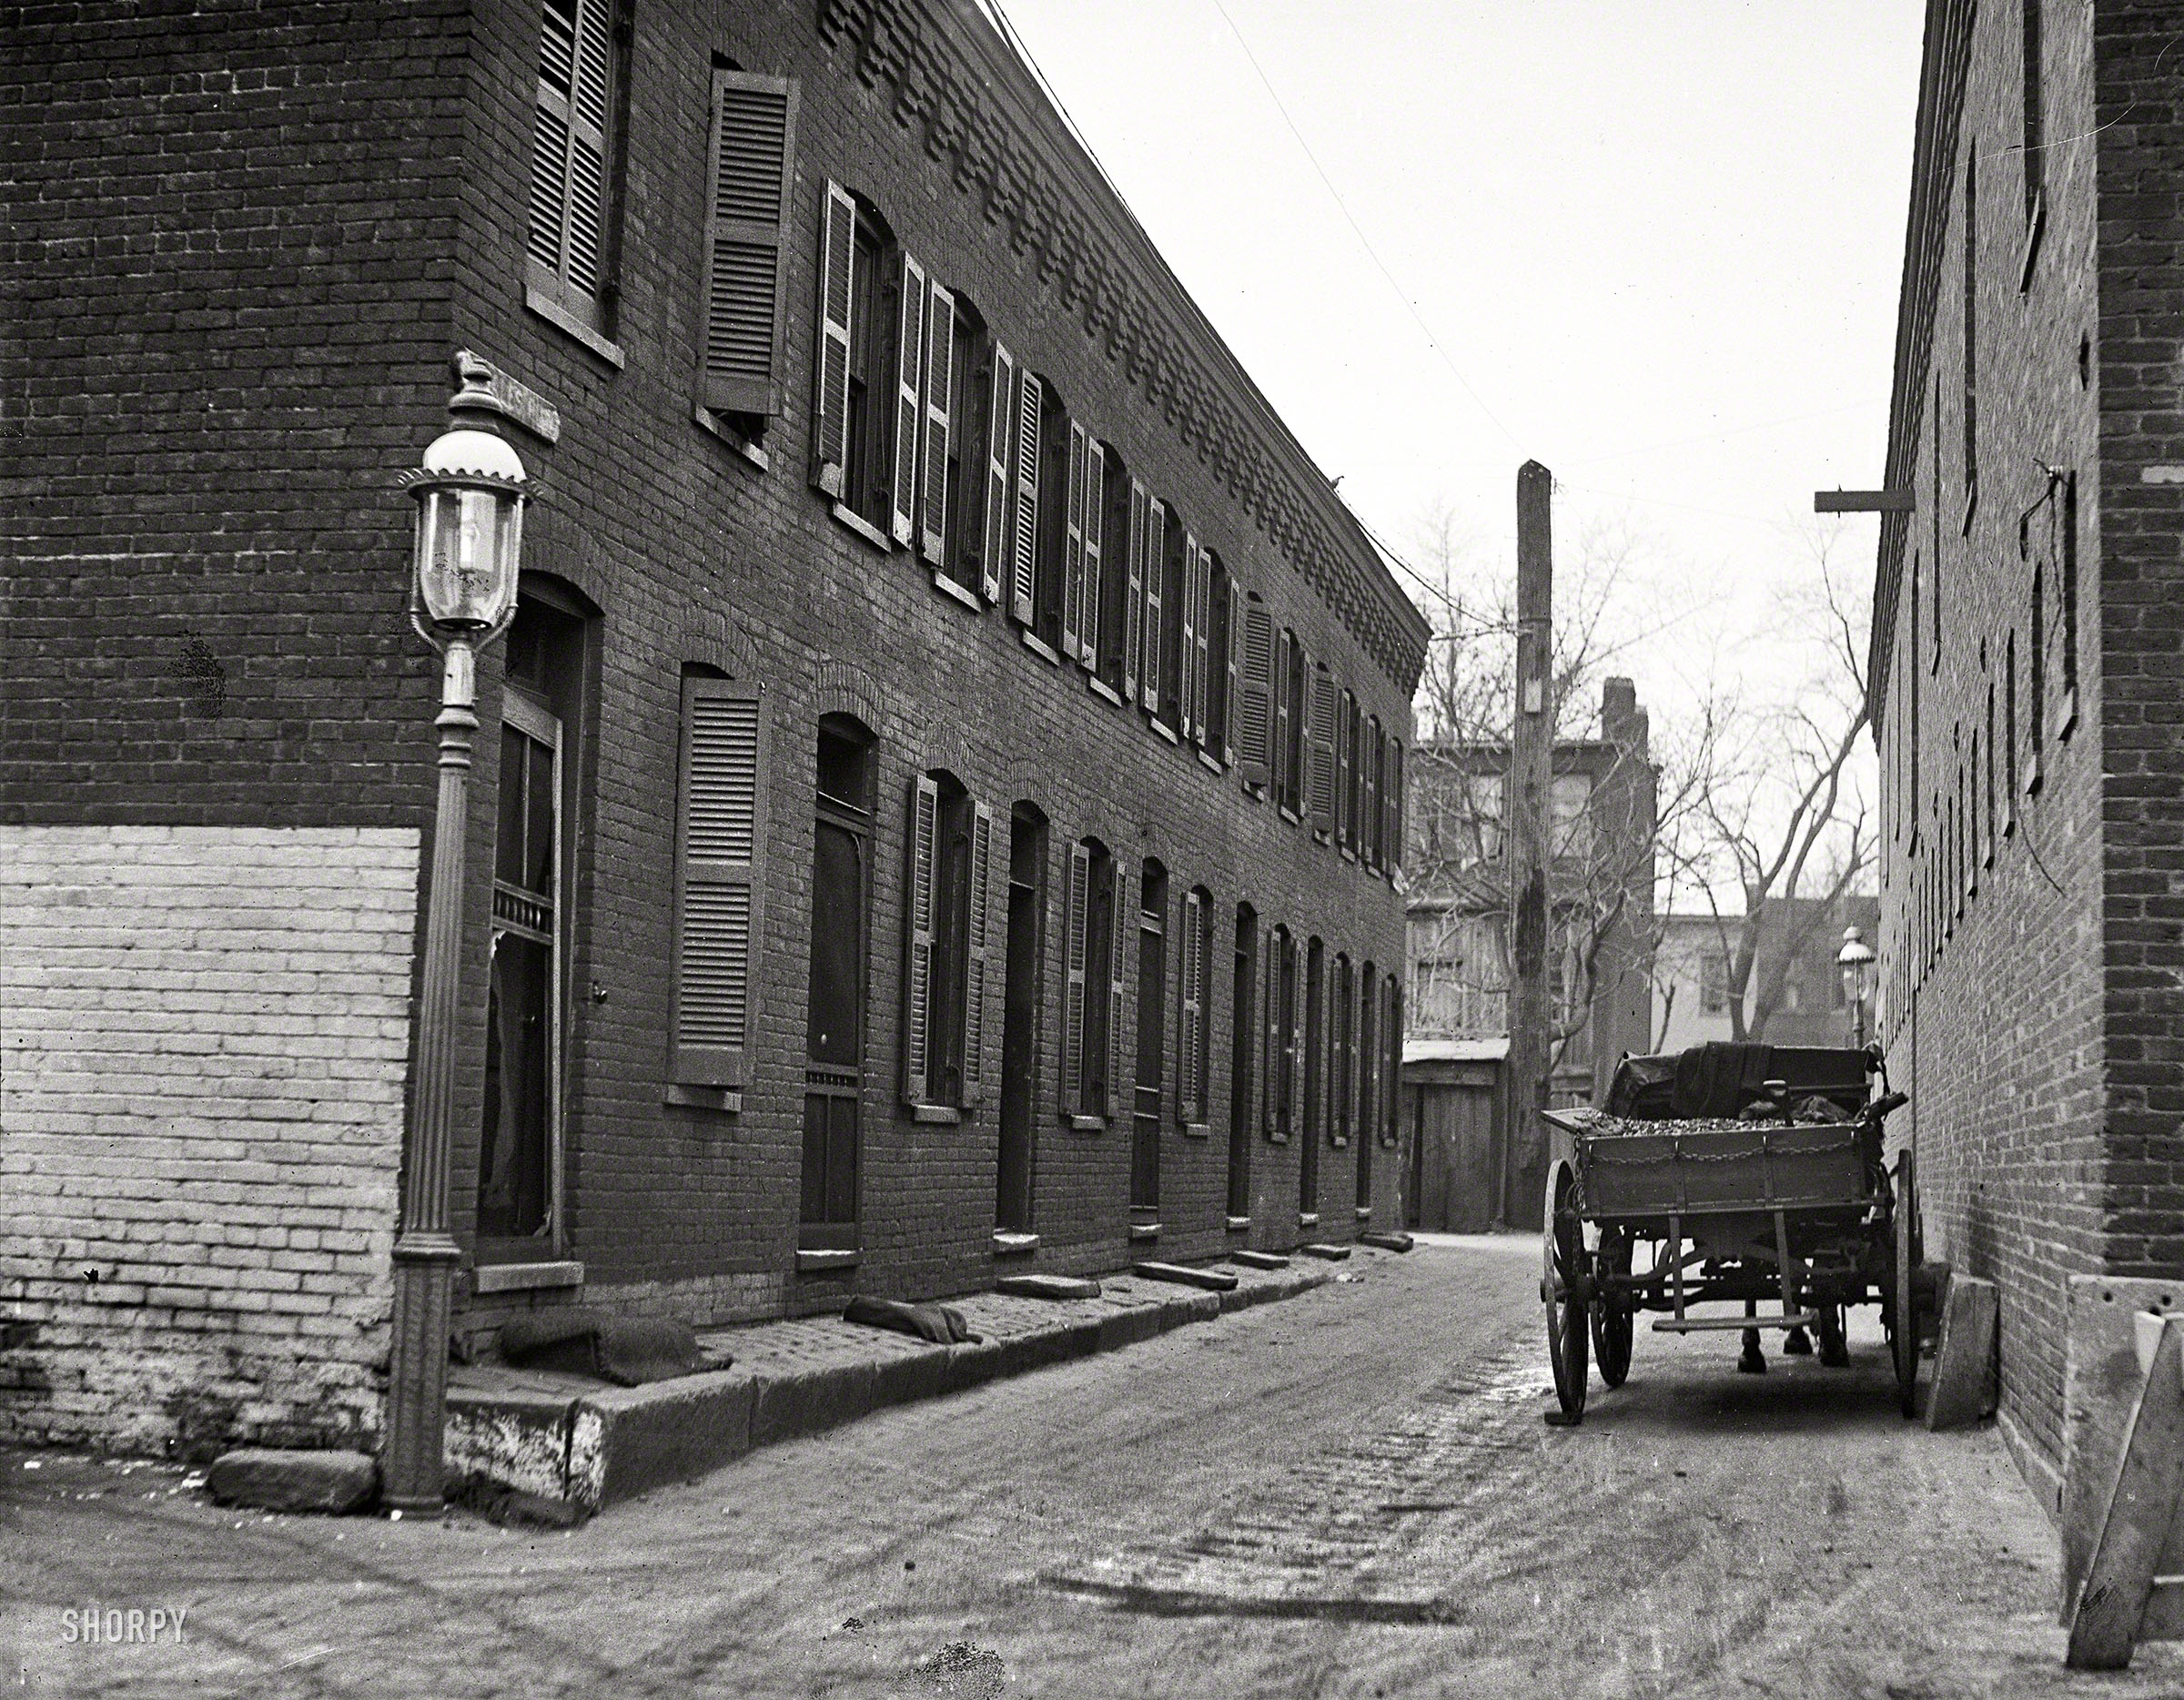 Washington, D.C. "City rowhouses, 1923." A coal wagon in DeSales Alley. Harris & Ewing Collection glass negative. View full size.